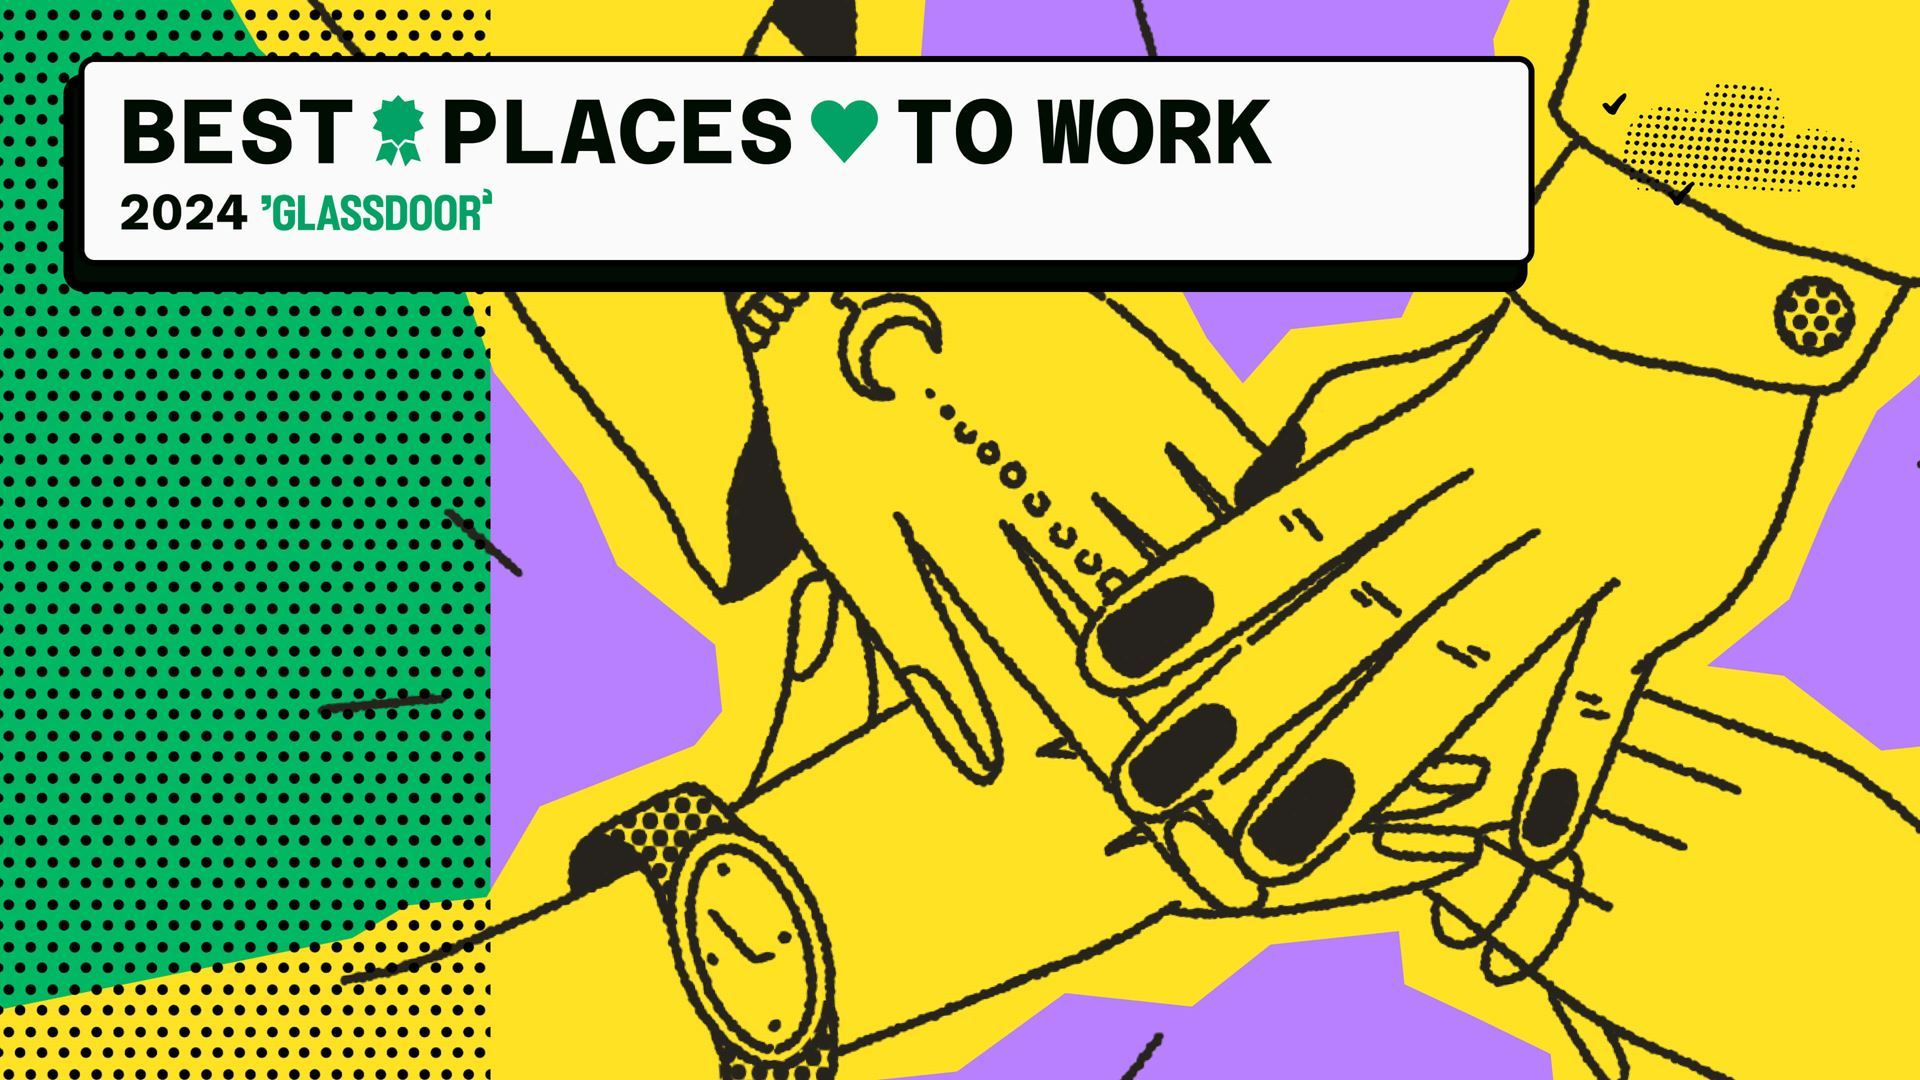 Fidelity named to Glassdoor’s Best Places to Work 2024 list